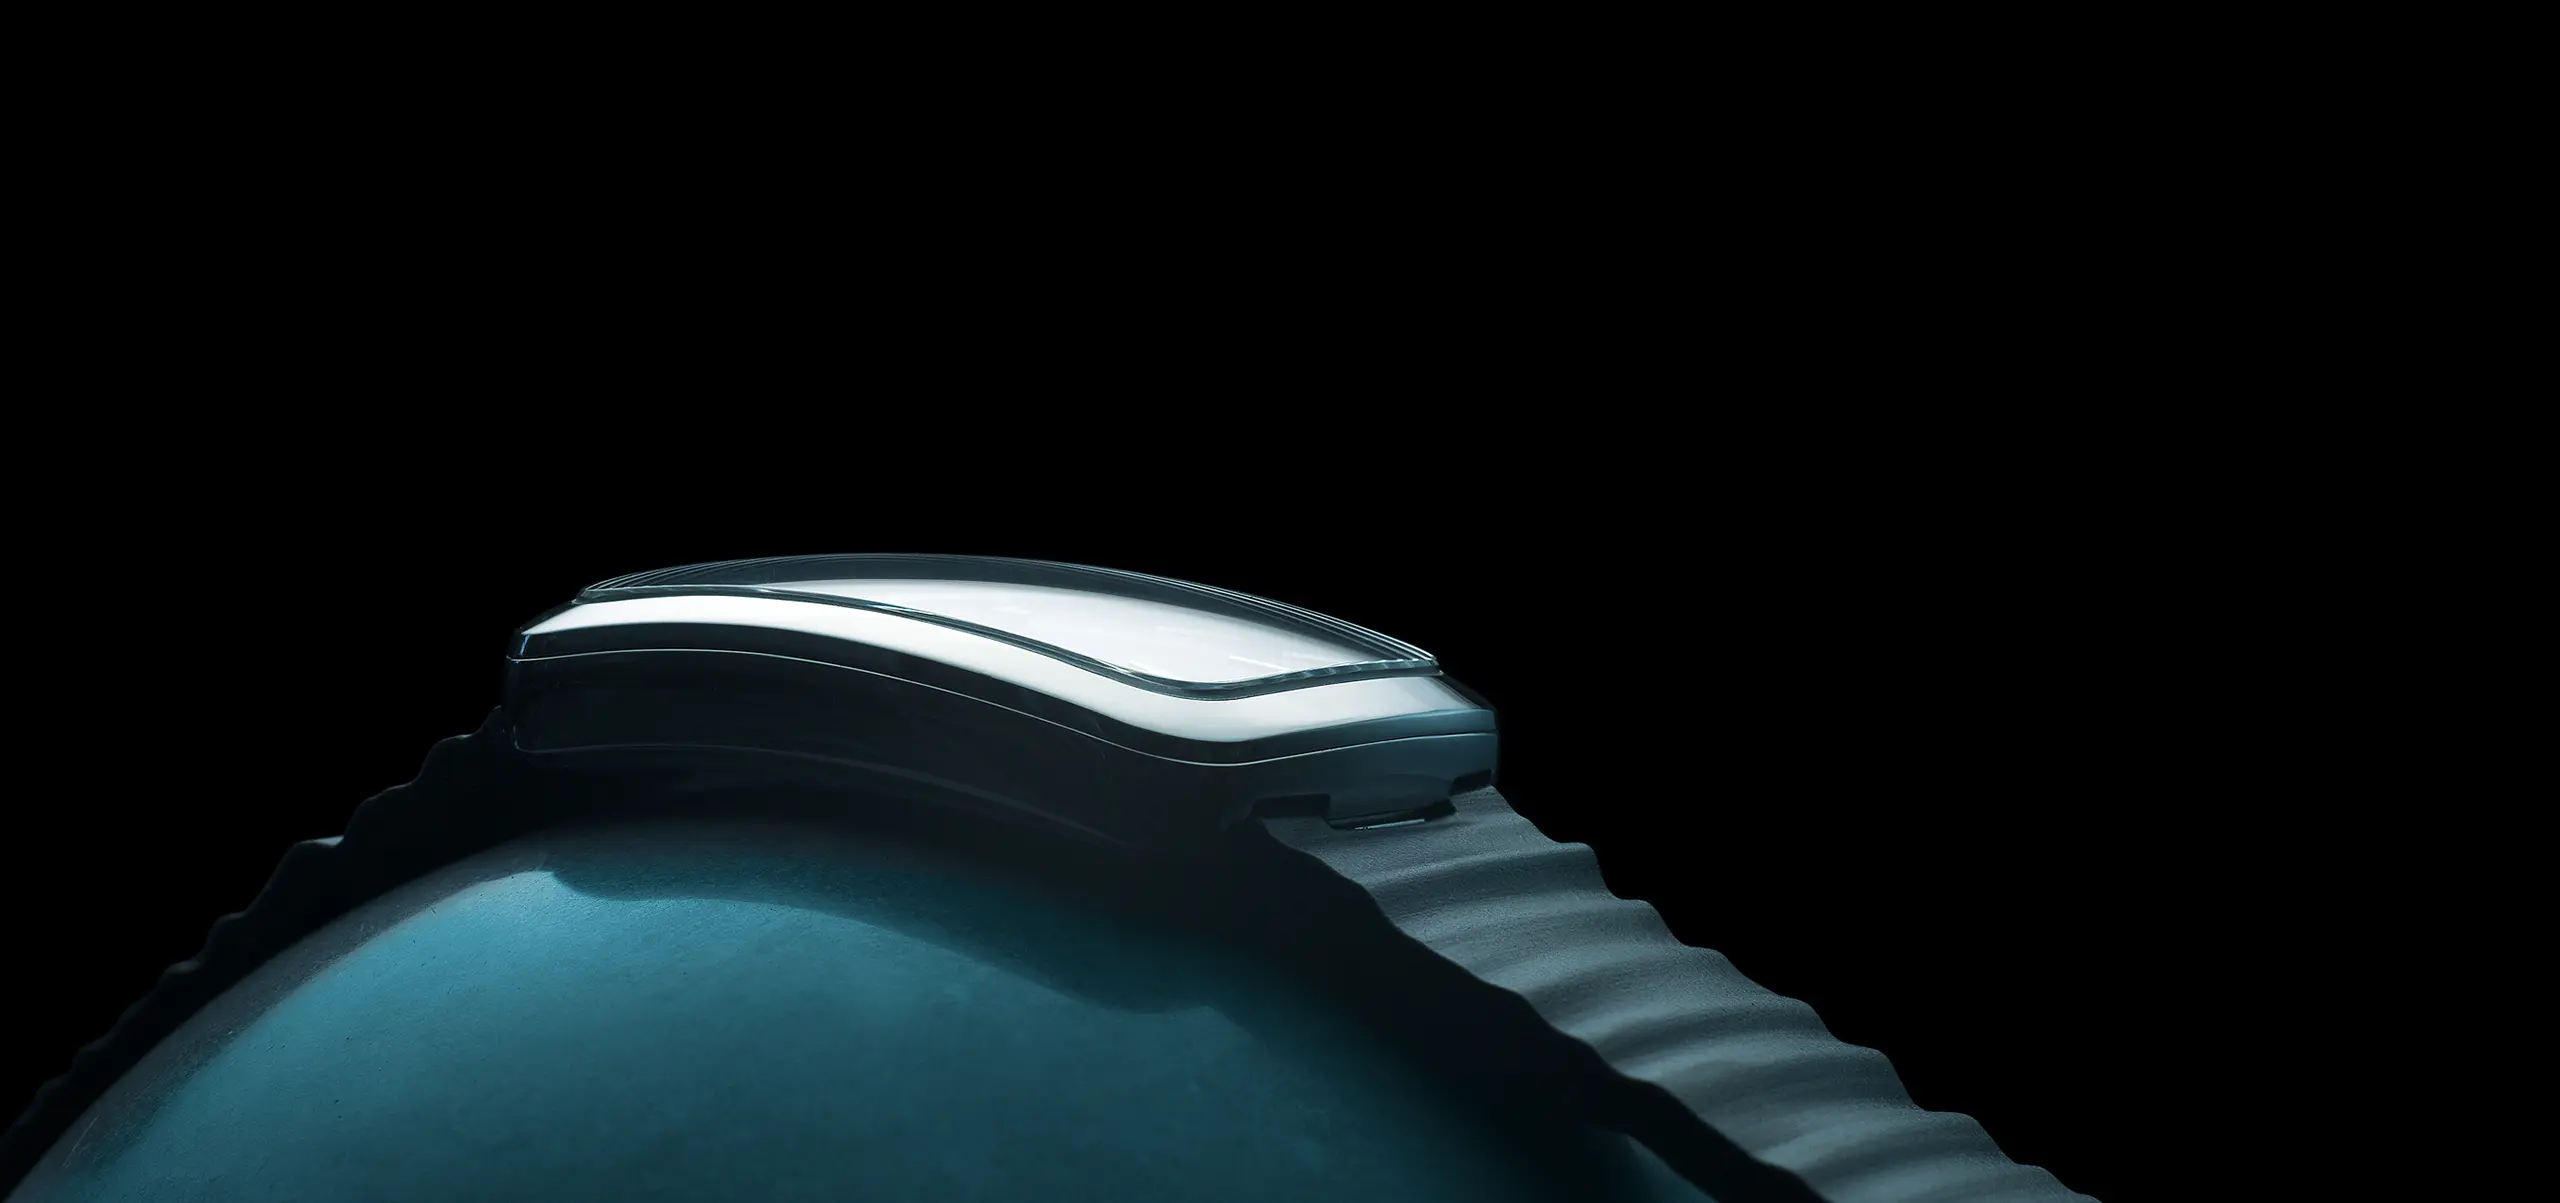 generative design luxury watch by groen and Boothman